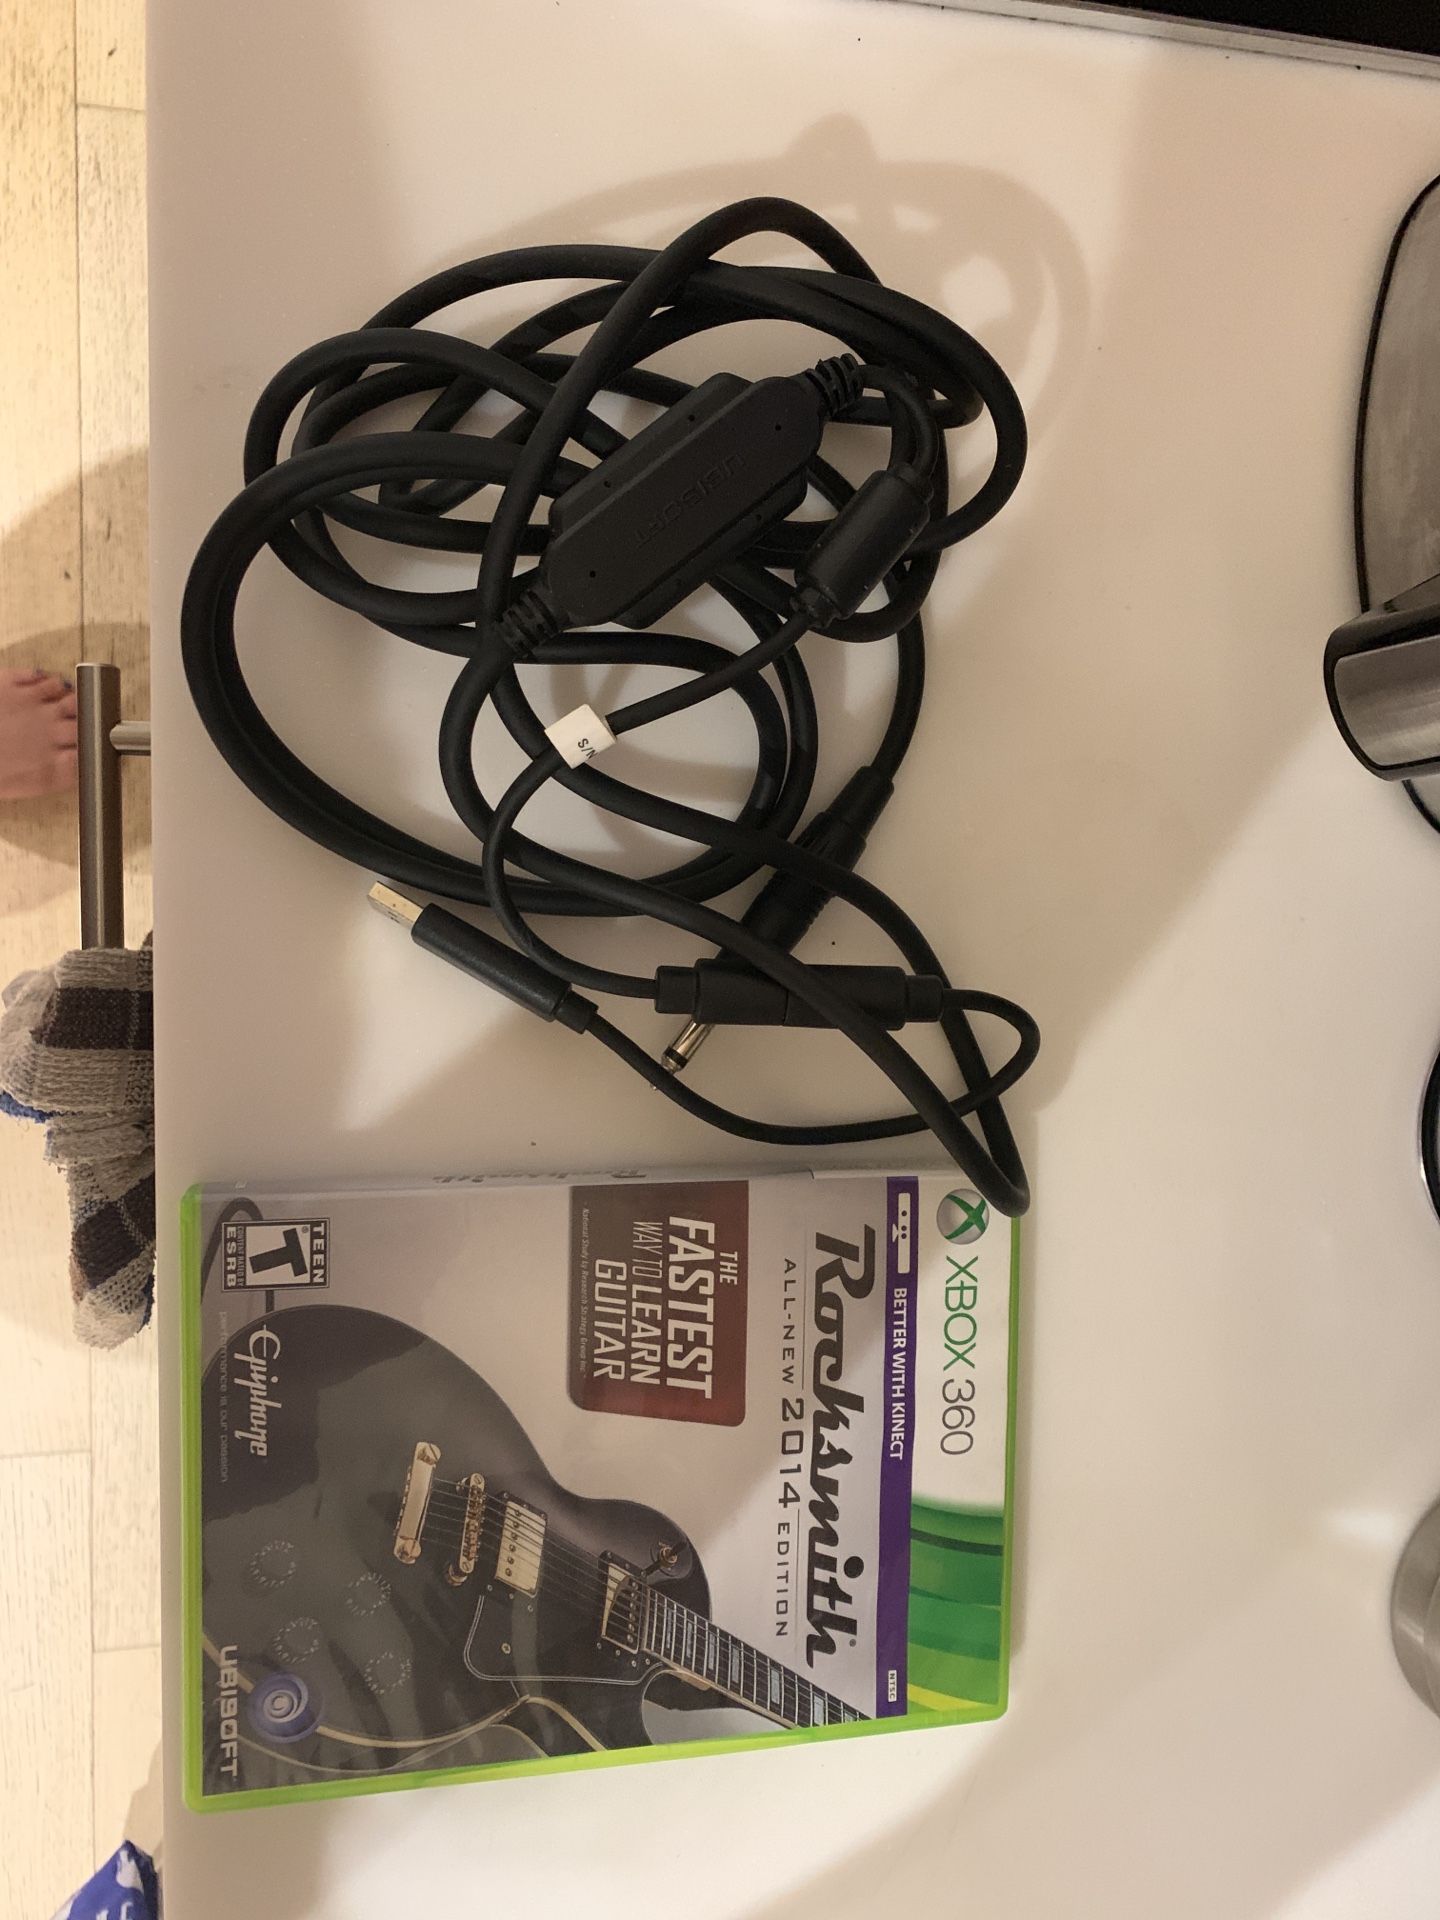 Xbox 360 rock smith and cord